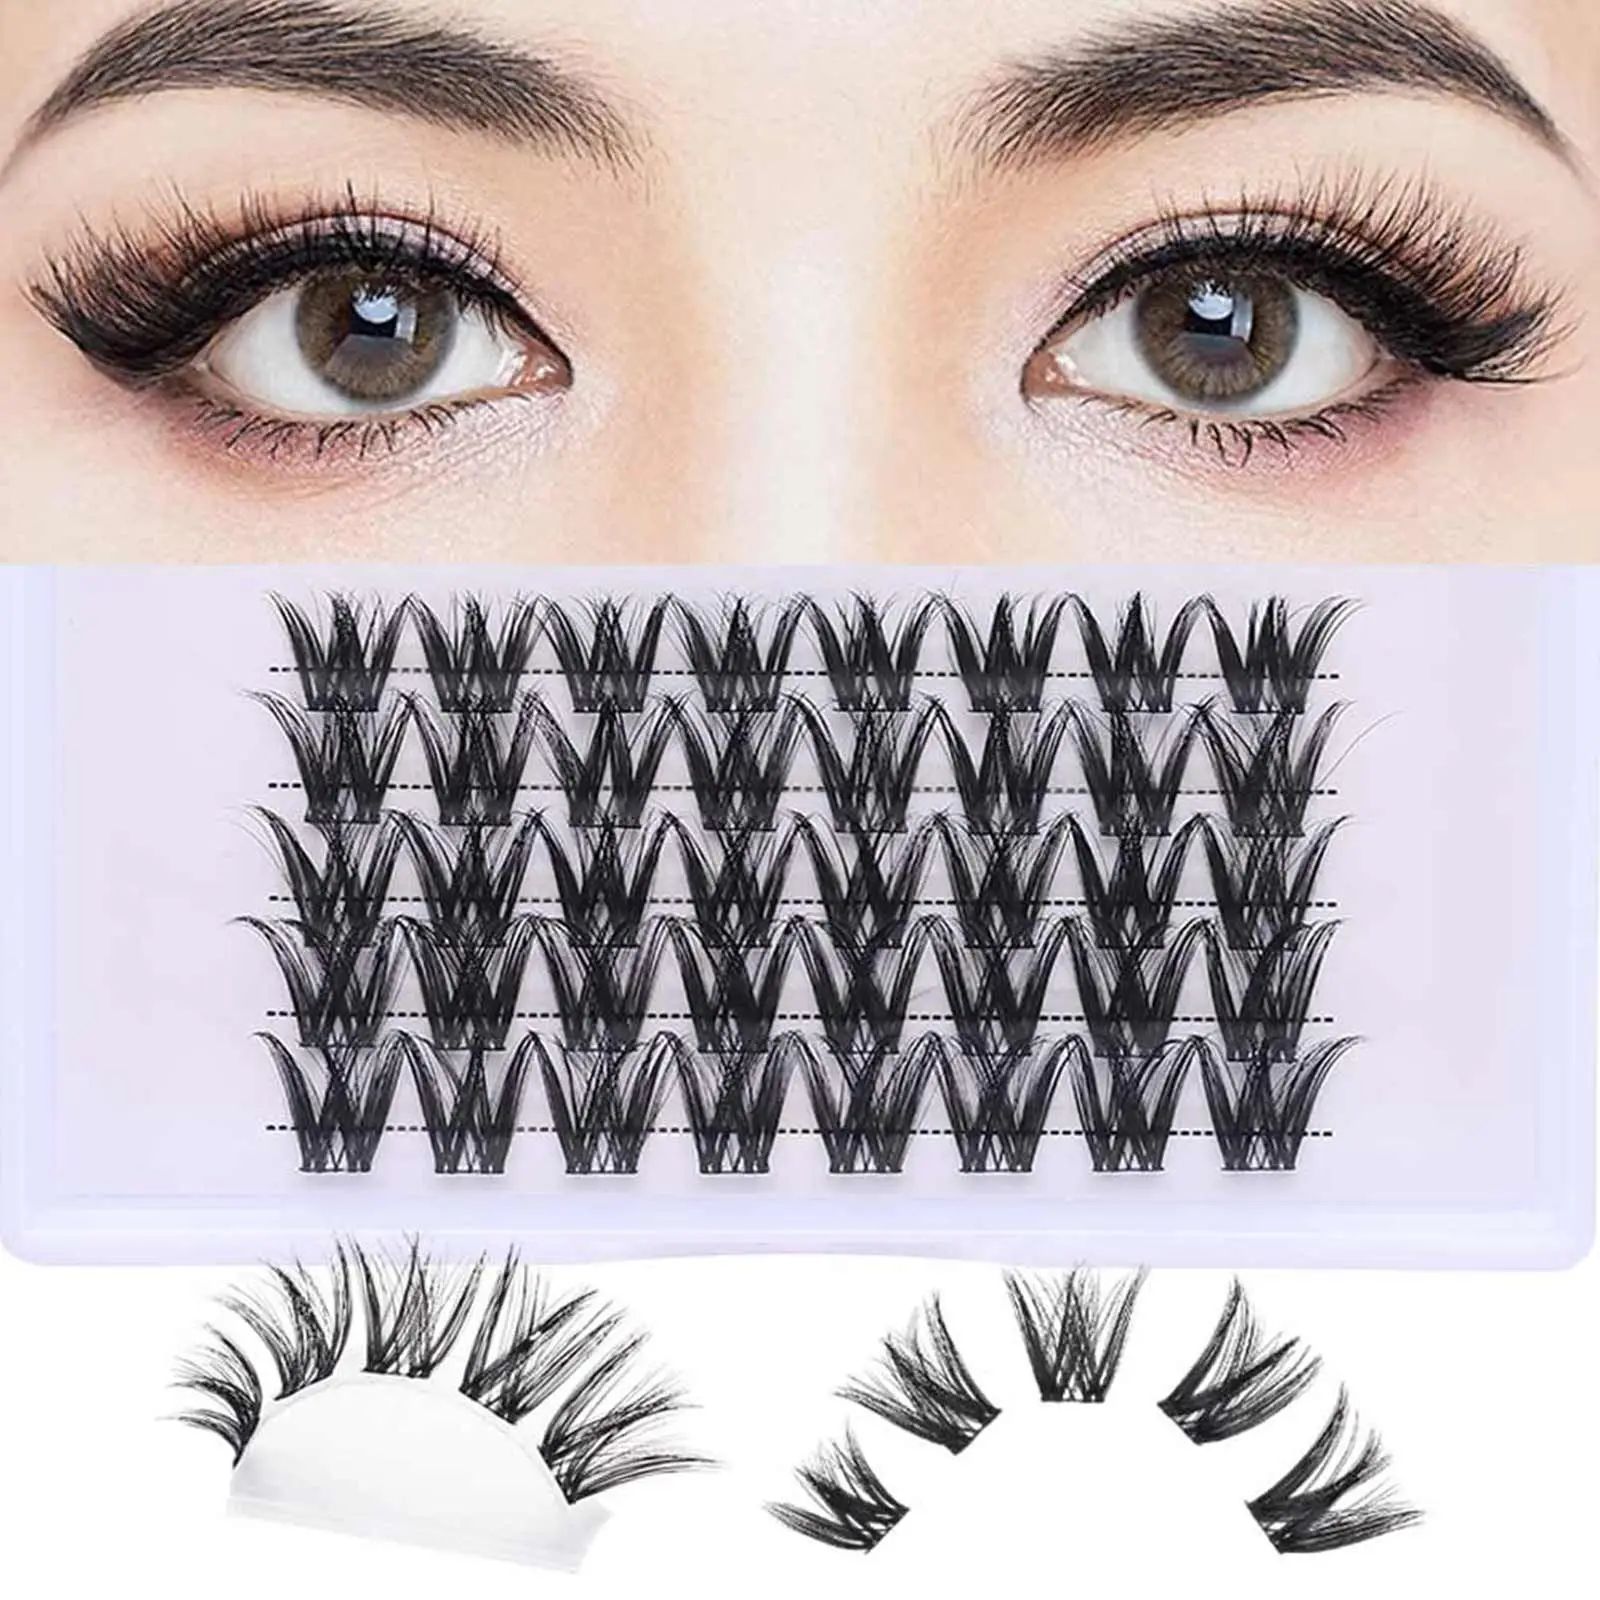 

D Curl Cluster Lashes Thin Band Faxu Mink Hair False Eyelahs Mix Length Mix12-14-16mm Lash Clusters Easy To Apply at Home